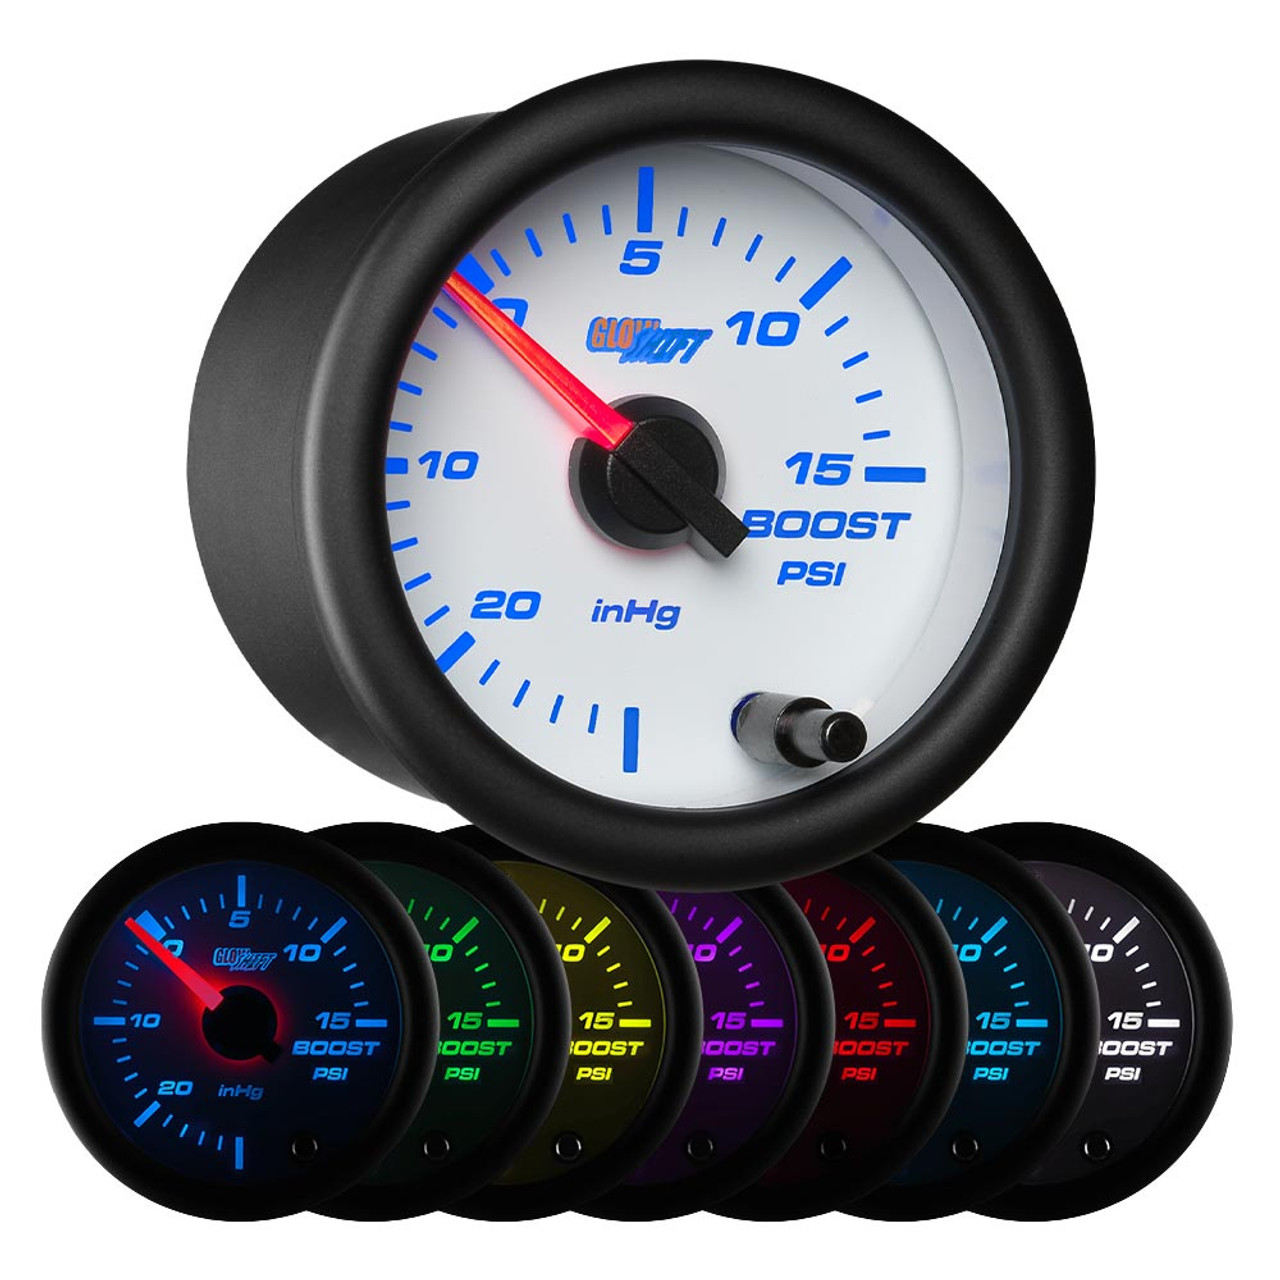 GlowShift White Color Series 15 PSI Boost Vacuum Gauge